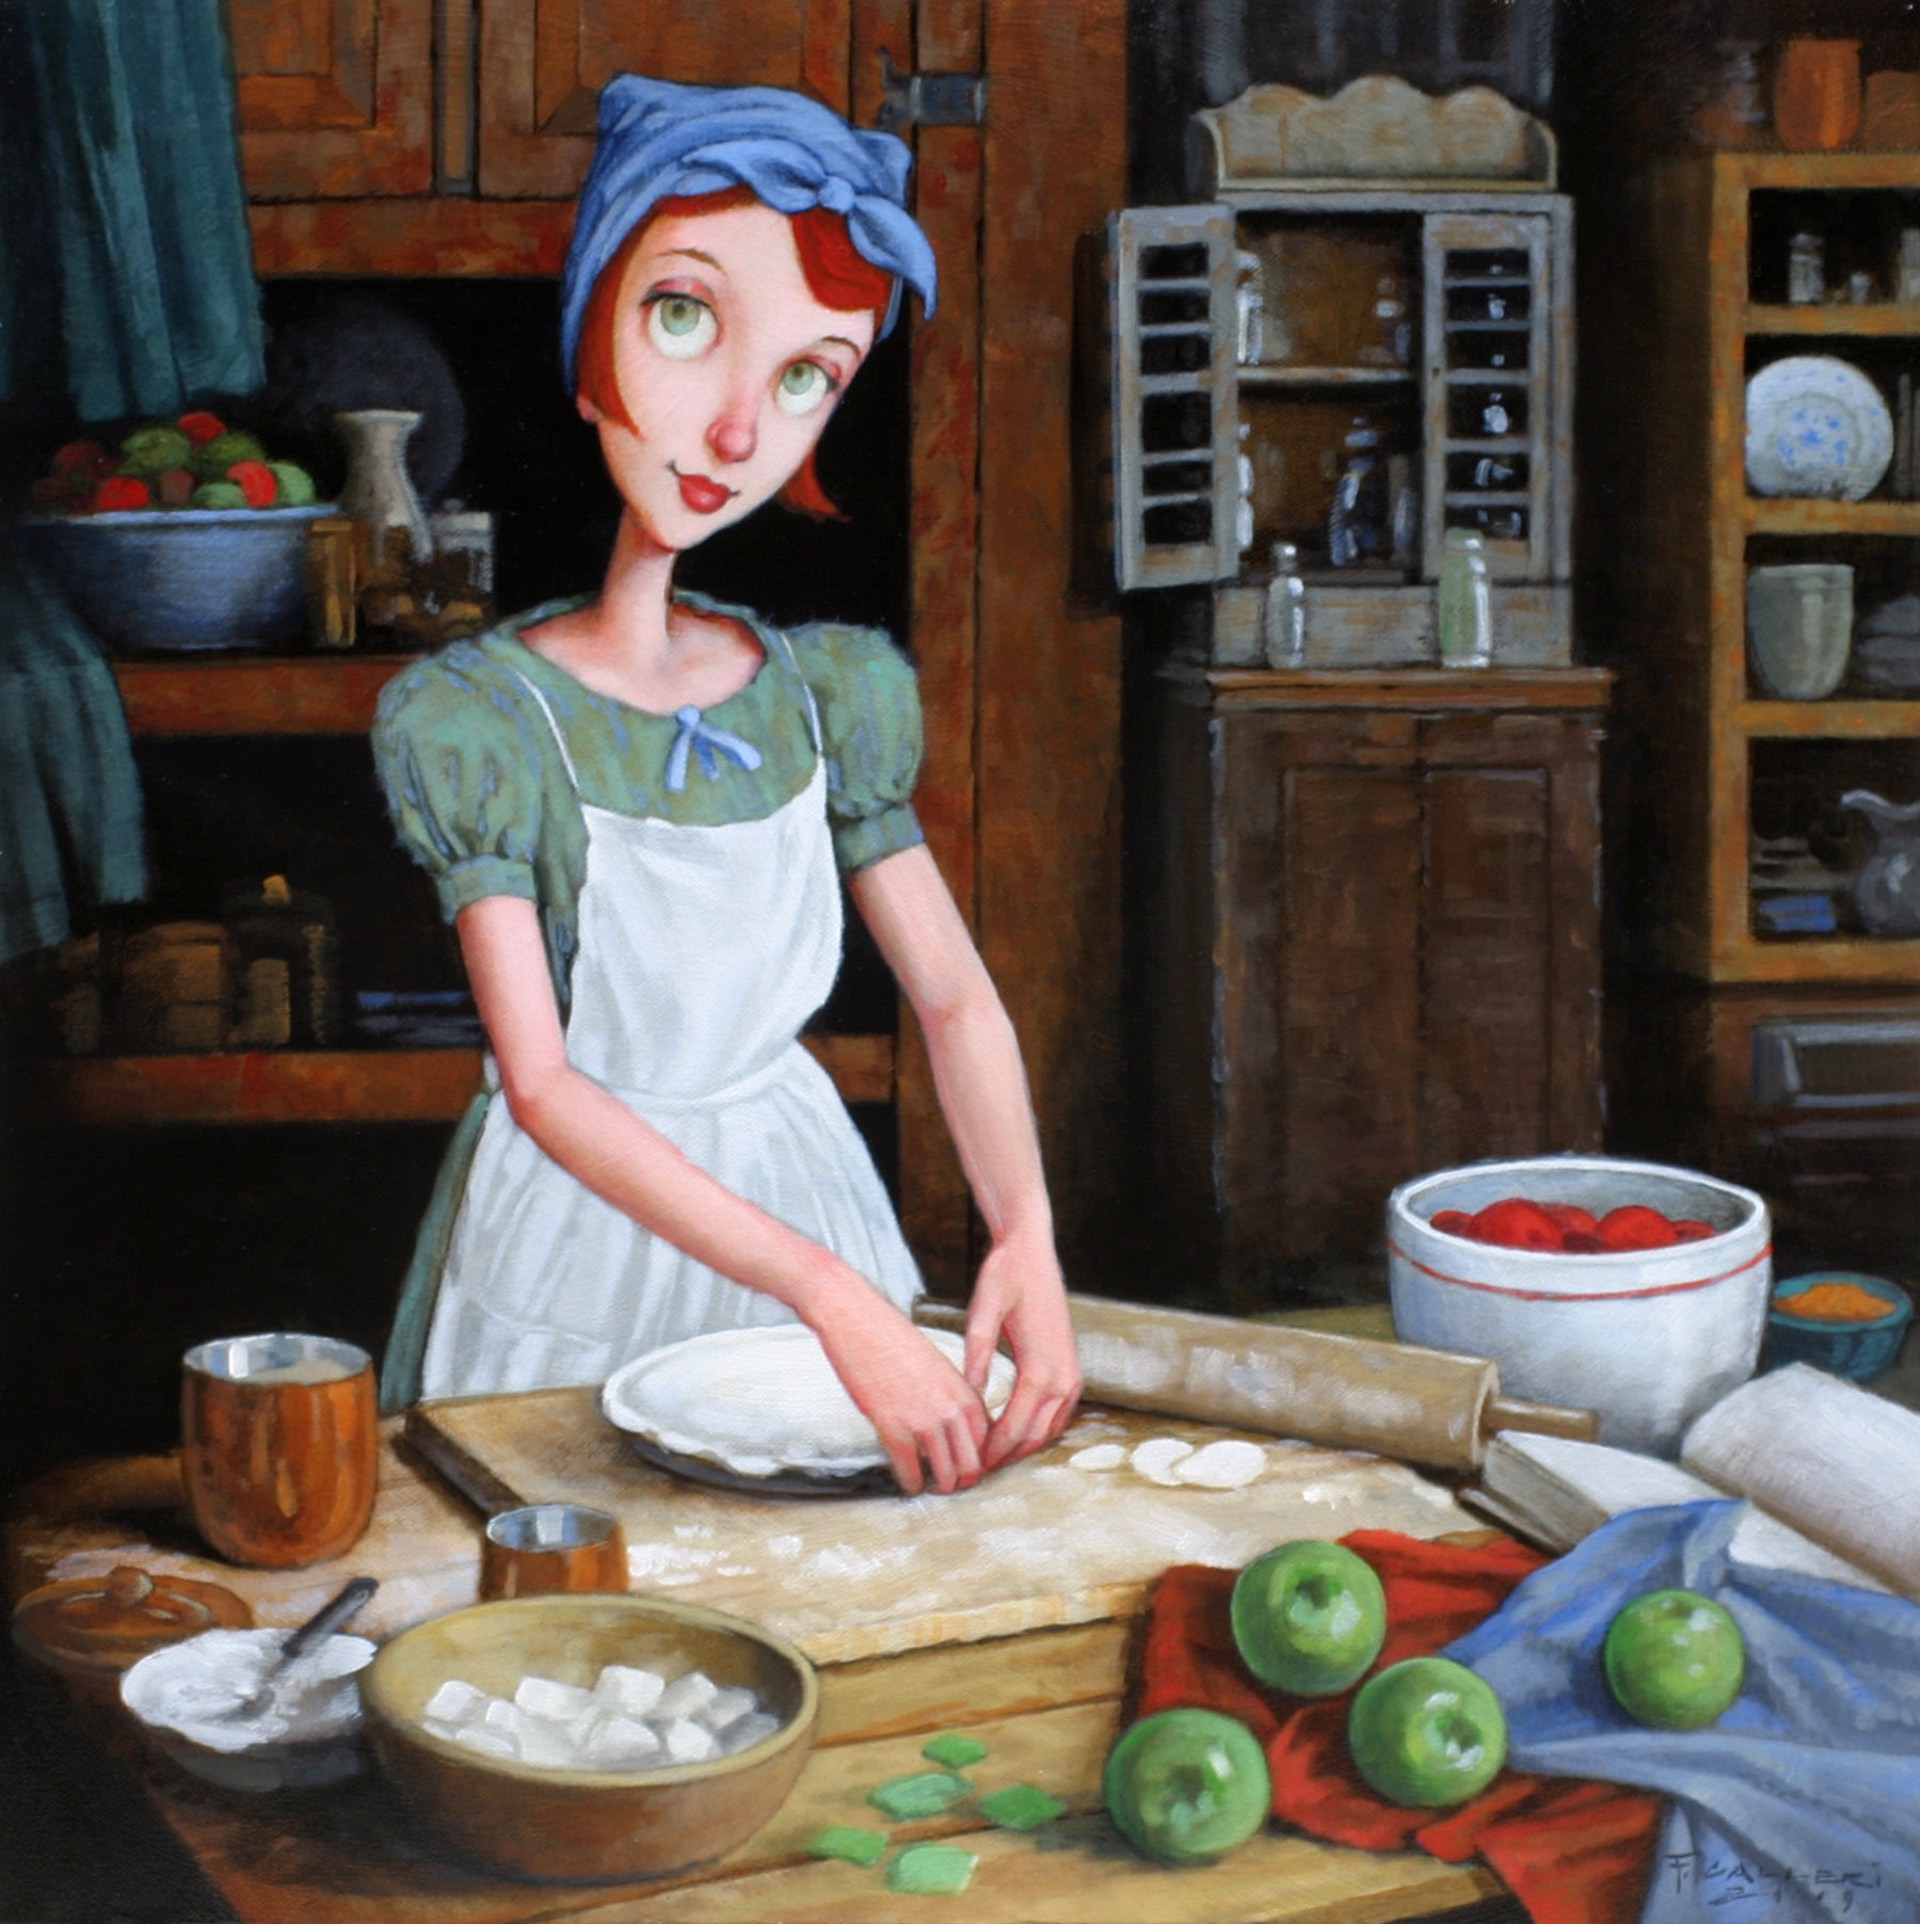 Tart and Sweet by Fred Calleri